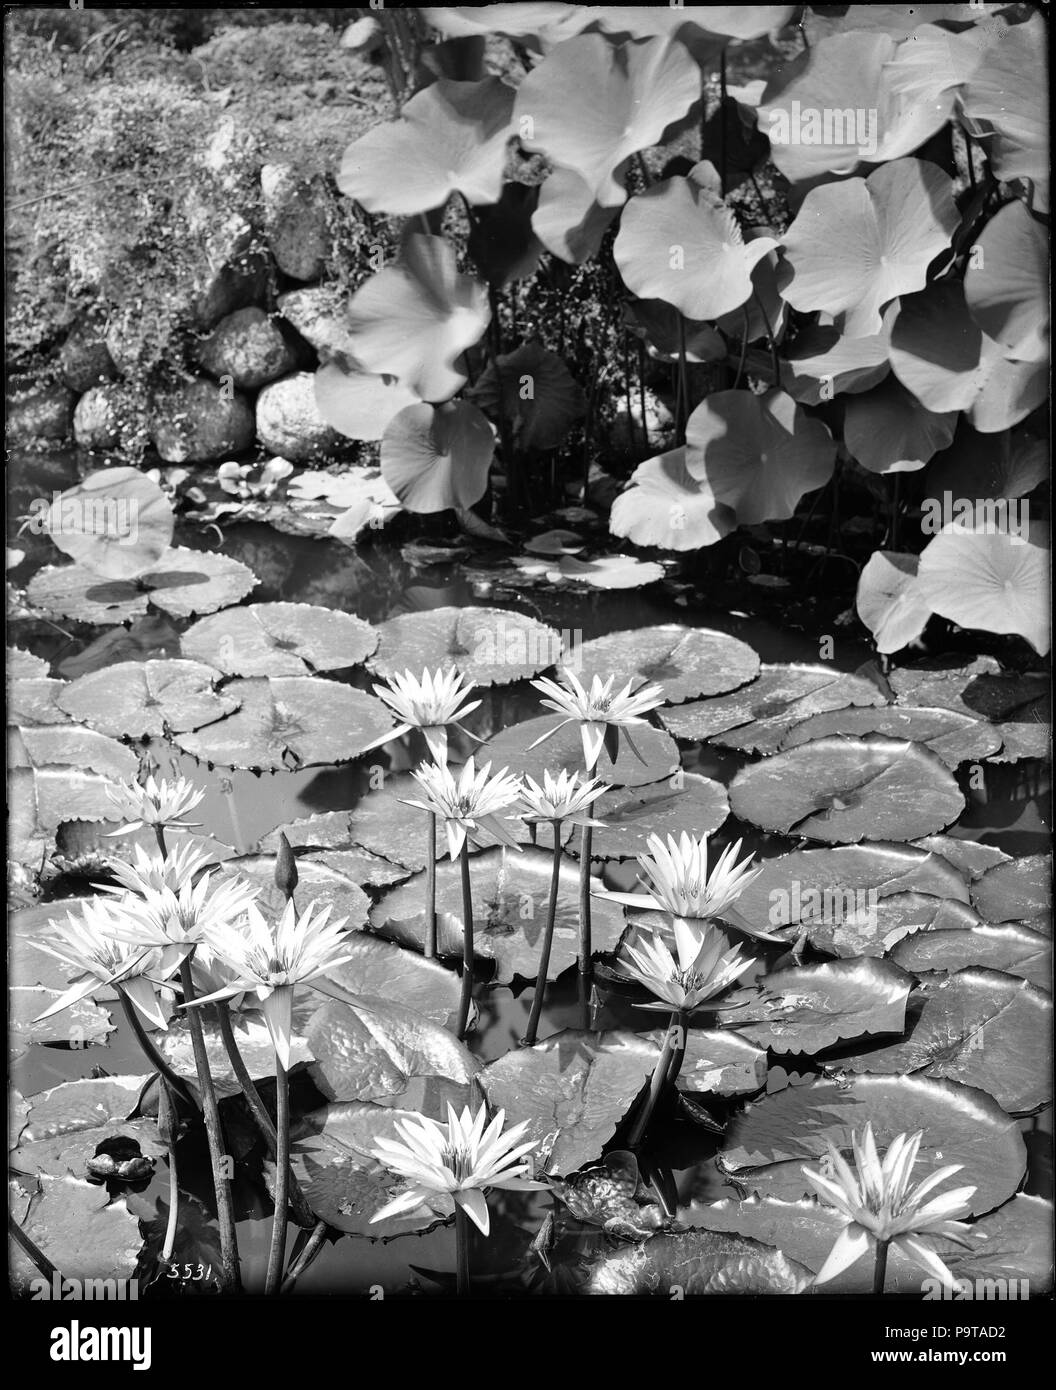 . English: Close-up view of a water lily pond on the grounds of The Huntington, San Marino, ca.1920 Photograph of a close-up view of a water lily pond on the grounds of The Huntington, San Marino, ca.1920. The sun, reflecting off the water lily pads in the pond, gives the water lily pads a shiny look. Its veins and imperfections are magnified due to the sun's effect. Above the surface of the water juts the water lily flowers, which casts a shadow on the pads below it. Reflections of other plants growing within and above the pond are visible in the water.; 'The Huntington is an oasis of art and Stock Photo